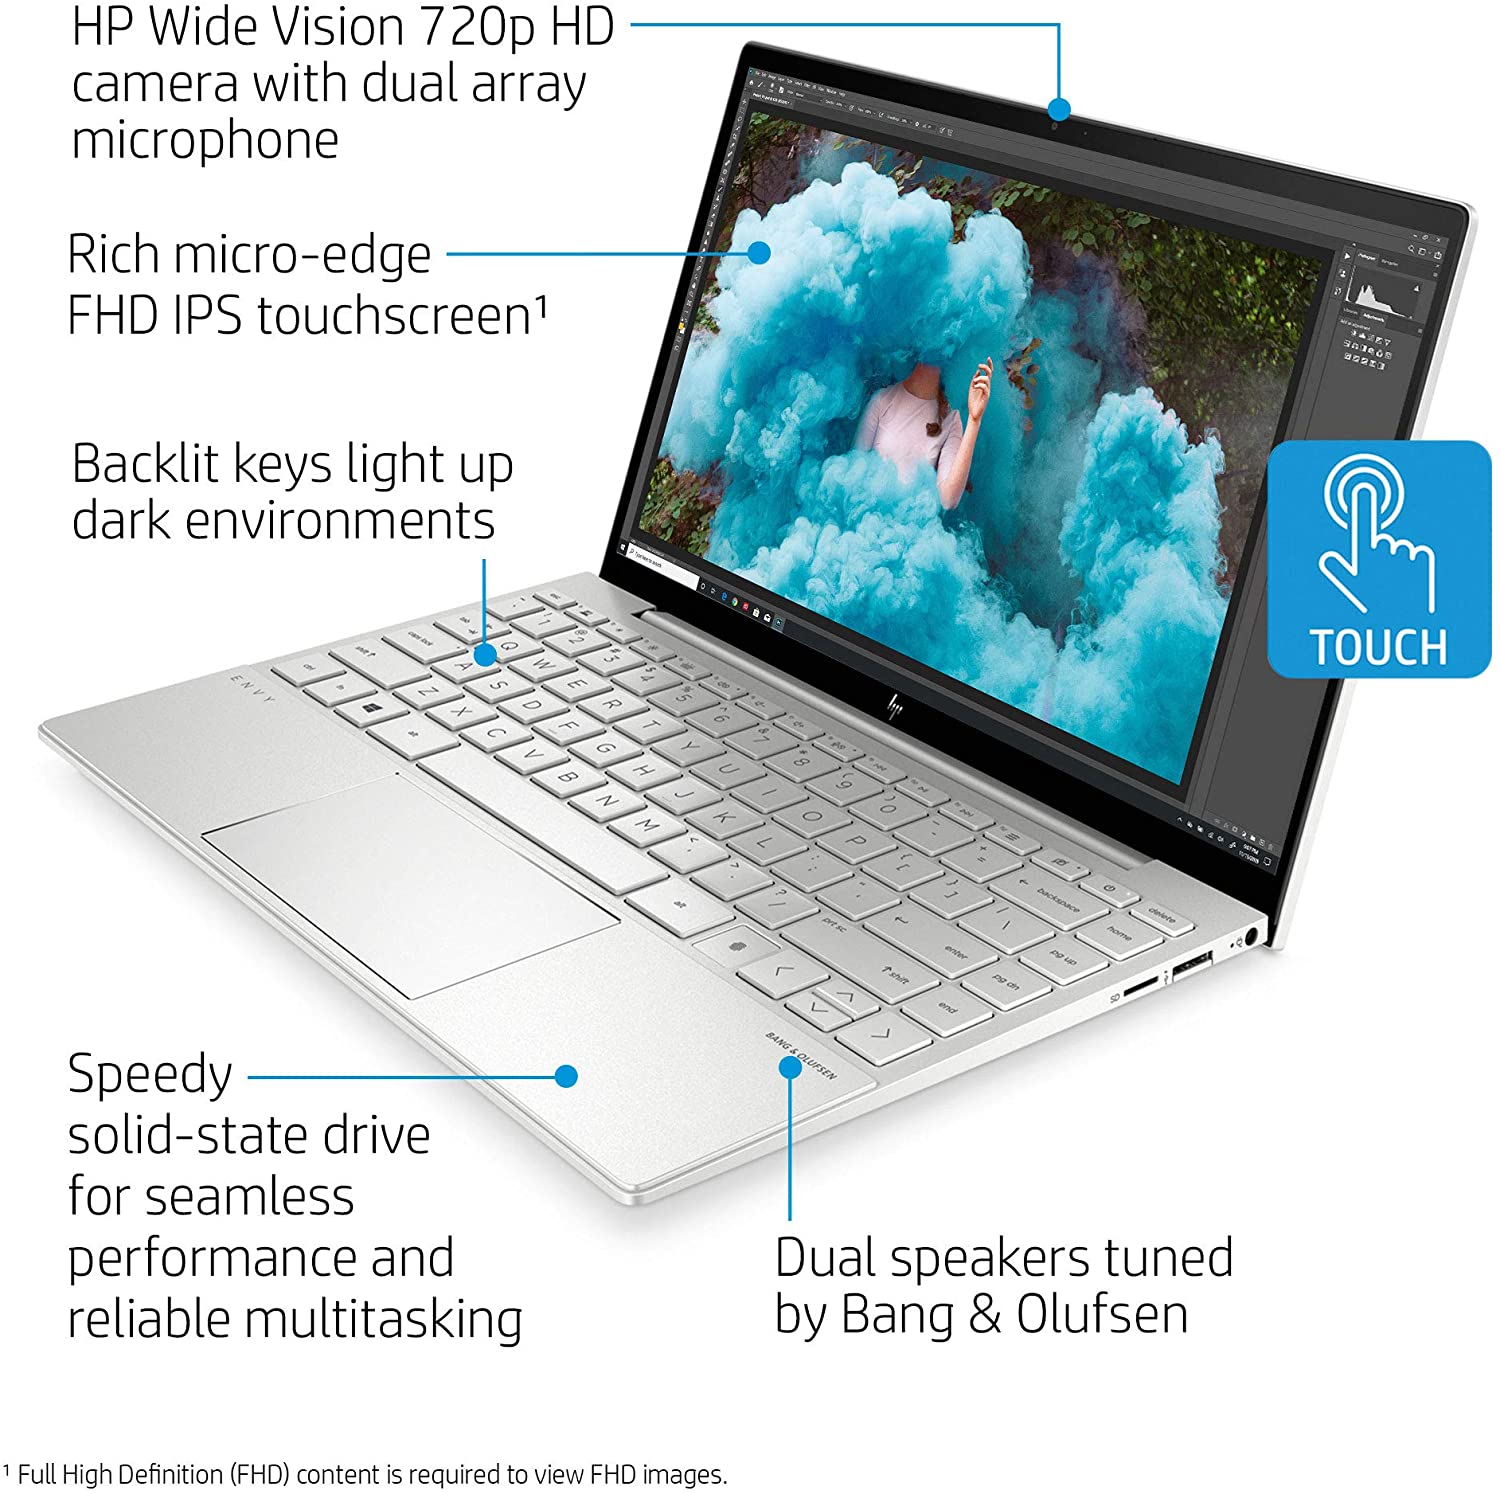 Systematisch Bevestiging aan de andere kant, HP Envy 13 Laptop, Intel Core i7-1165G7, 8 GB DDR4 RAM, 256 GB SSD Storage,  13.3-inch FHD Touchscreen Display, Windows 10 Home with Fingerprint Reader,  Camera Kill Switch (13-ba1010nr, 2020 Model) – Intech Computer shop